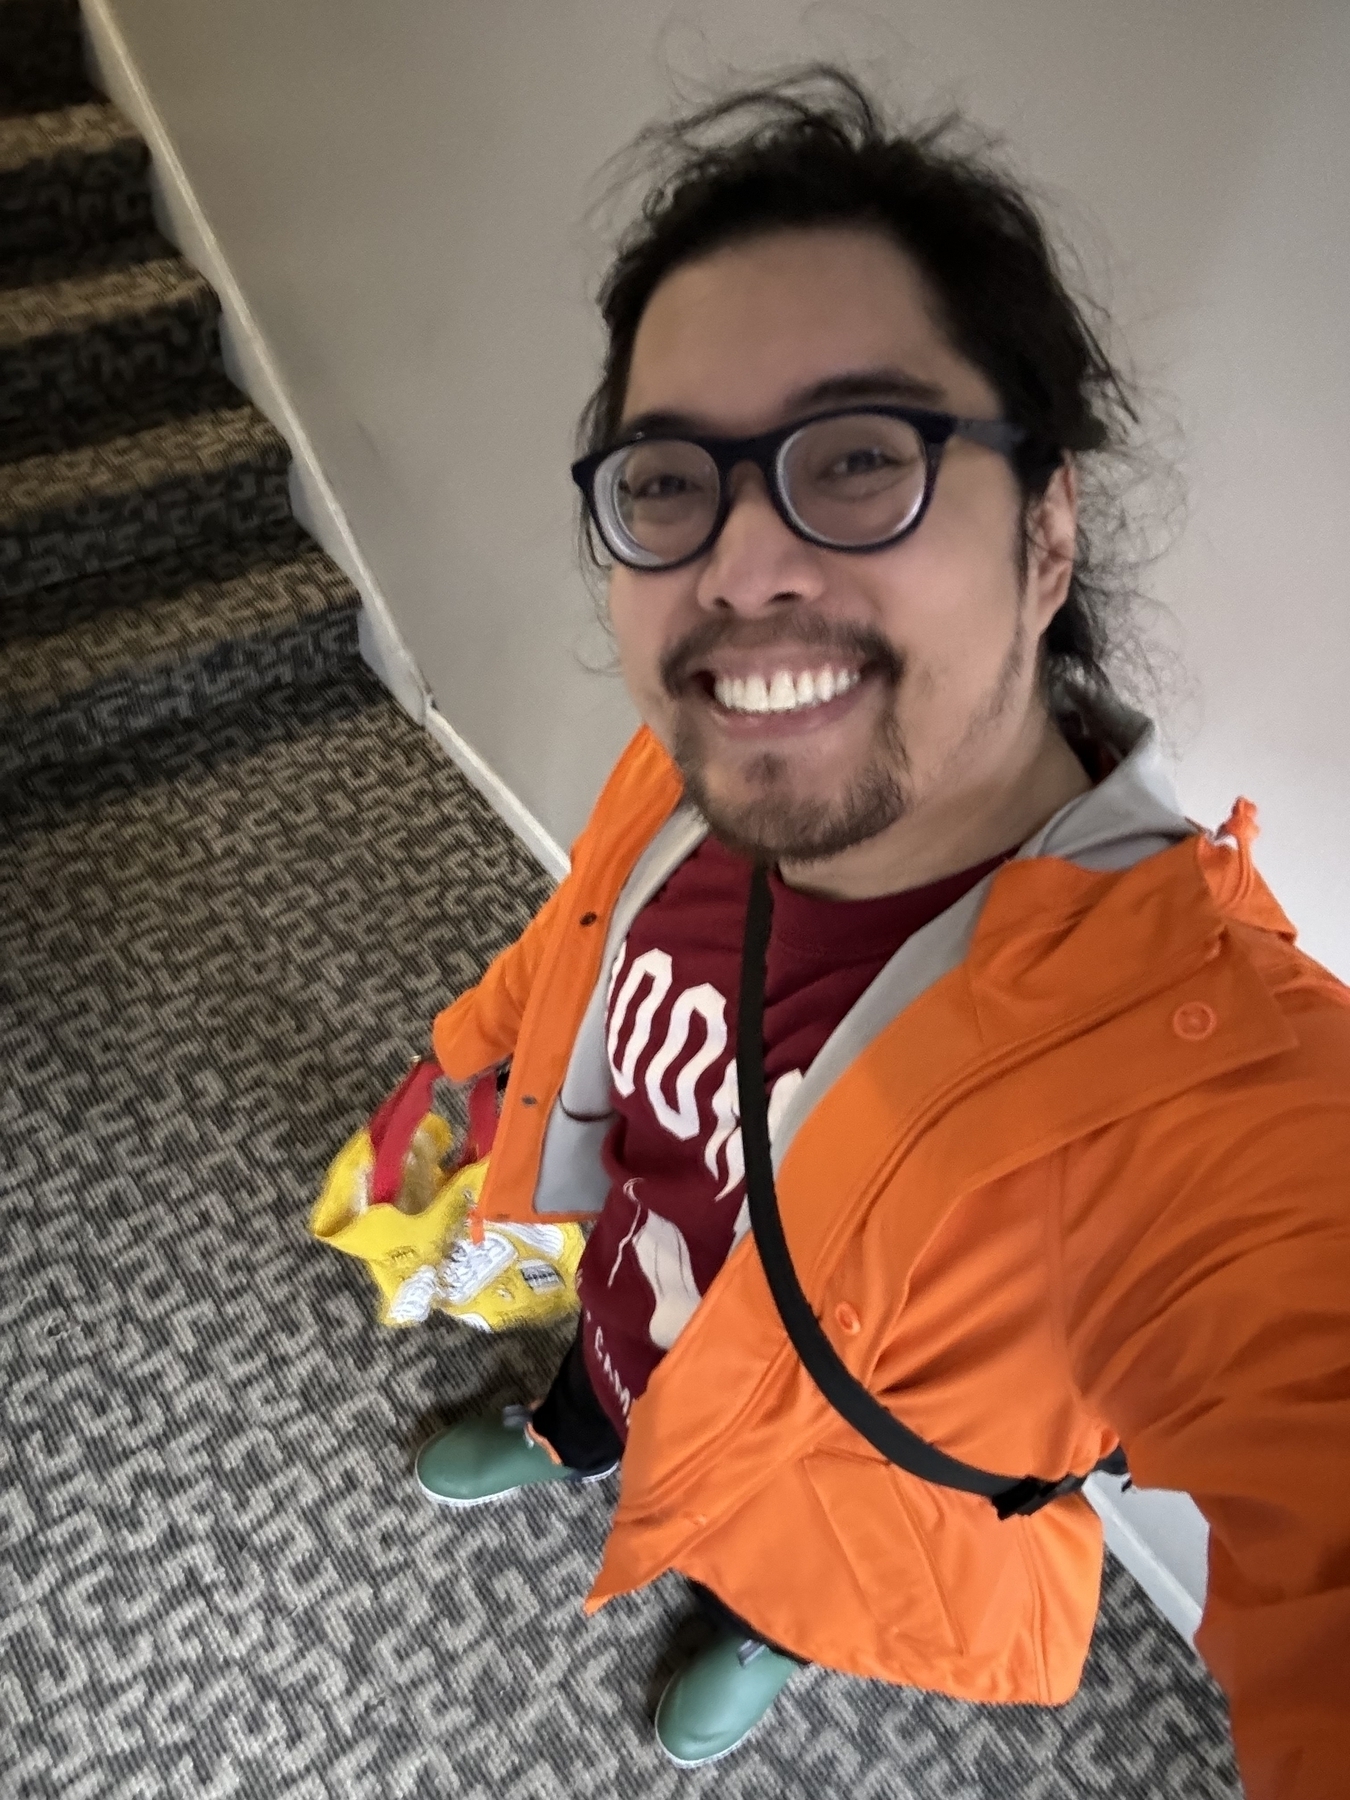 Man taking a selfie in a corridor, wearing glasses, a red shirt, orange jacket, and holding a yellow bag, with a staircase in the background.